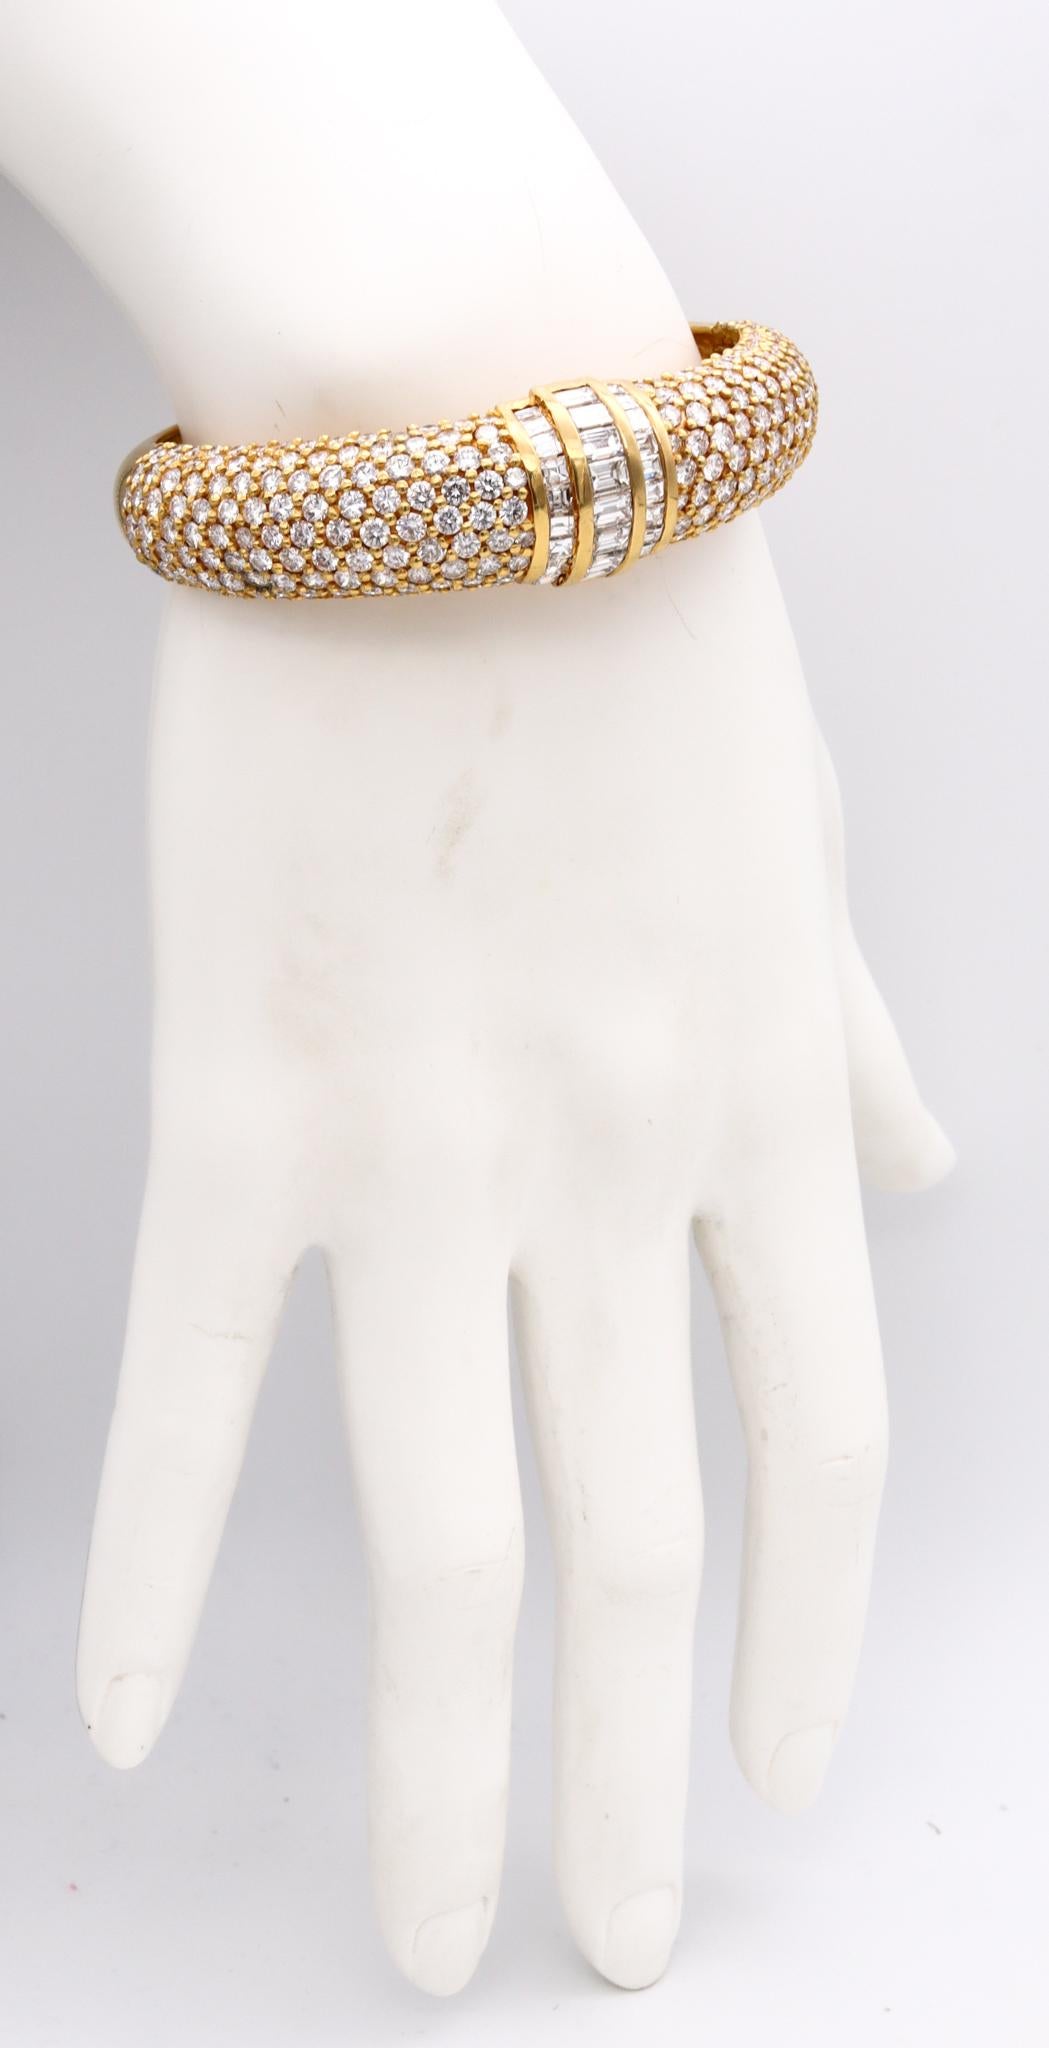 Exceptional diamonds bangle bracelet

Gorgeous designer's modern jewelry piece carefully crafted in Italy, with classic symmetric patterns in solid yellow gold of 18 karats. Suited, with an invisible hinge at one side as a closure system.

Mounted,